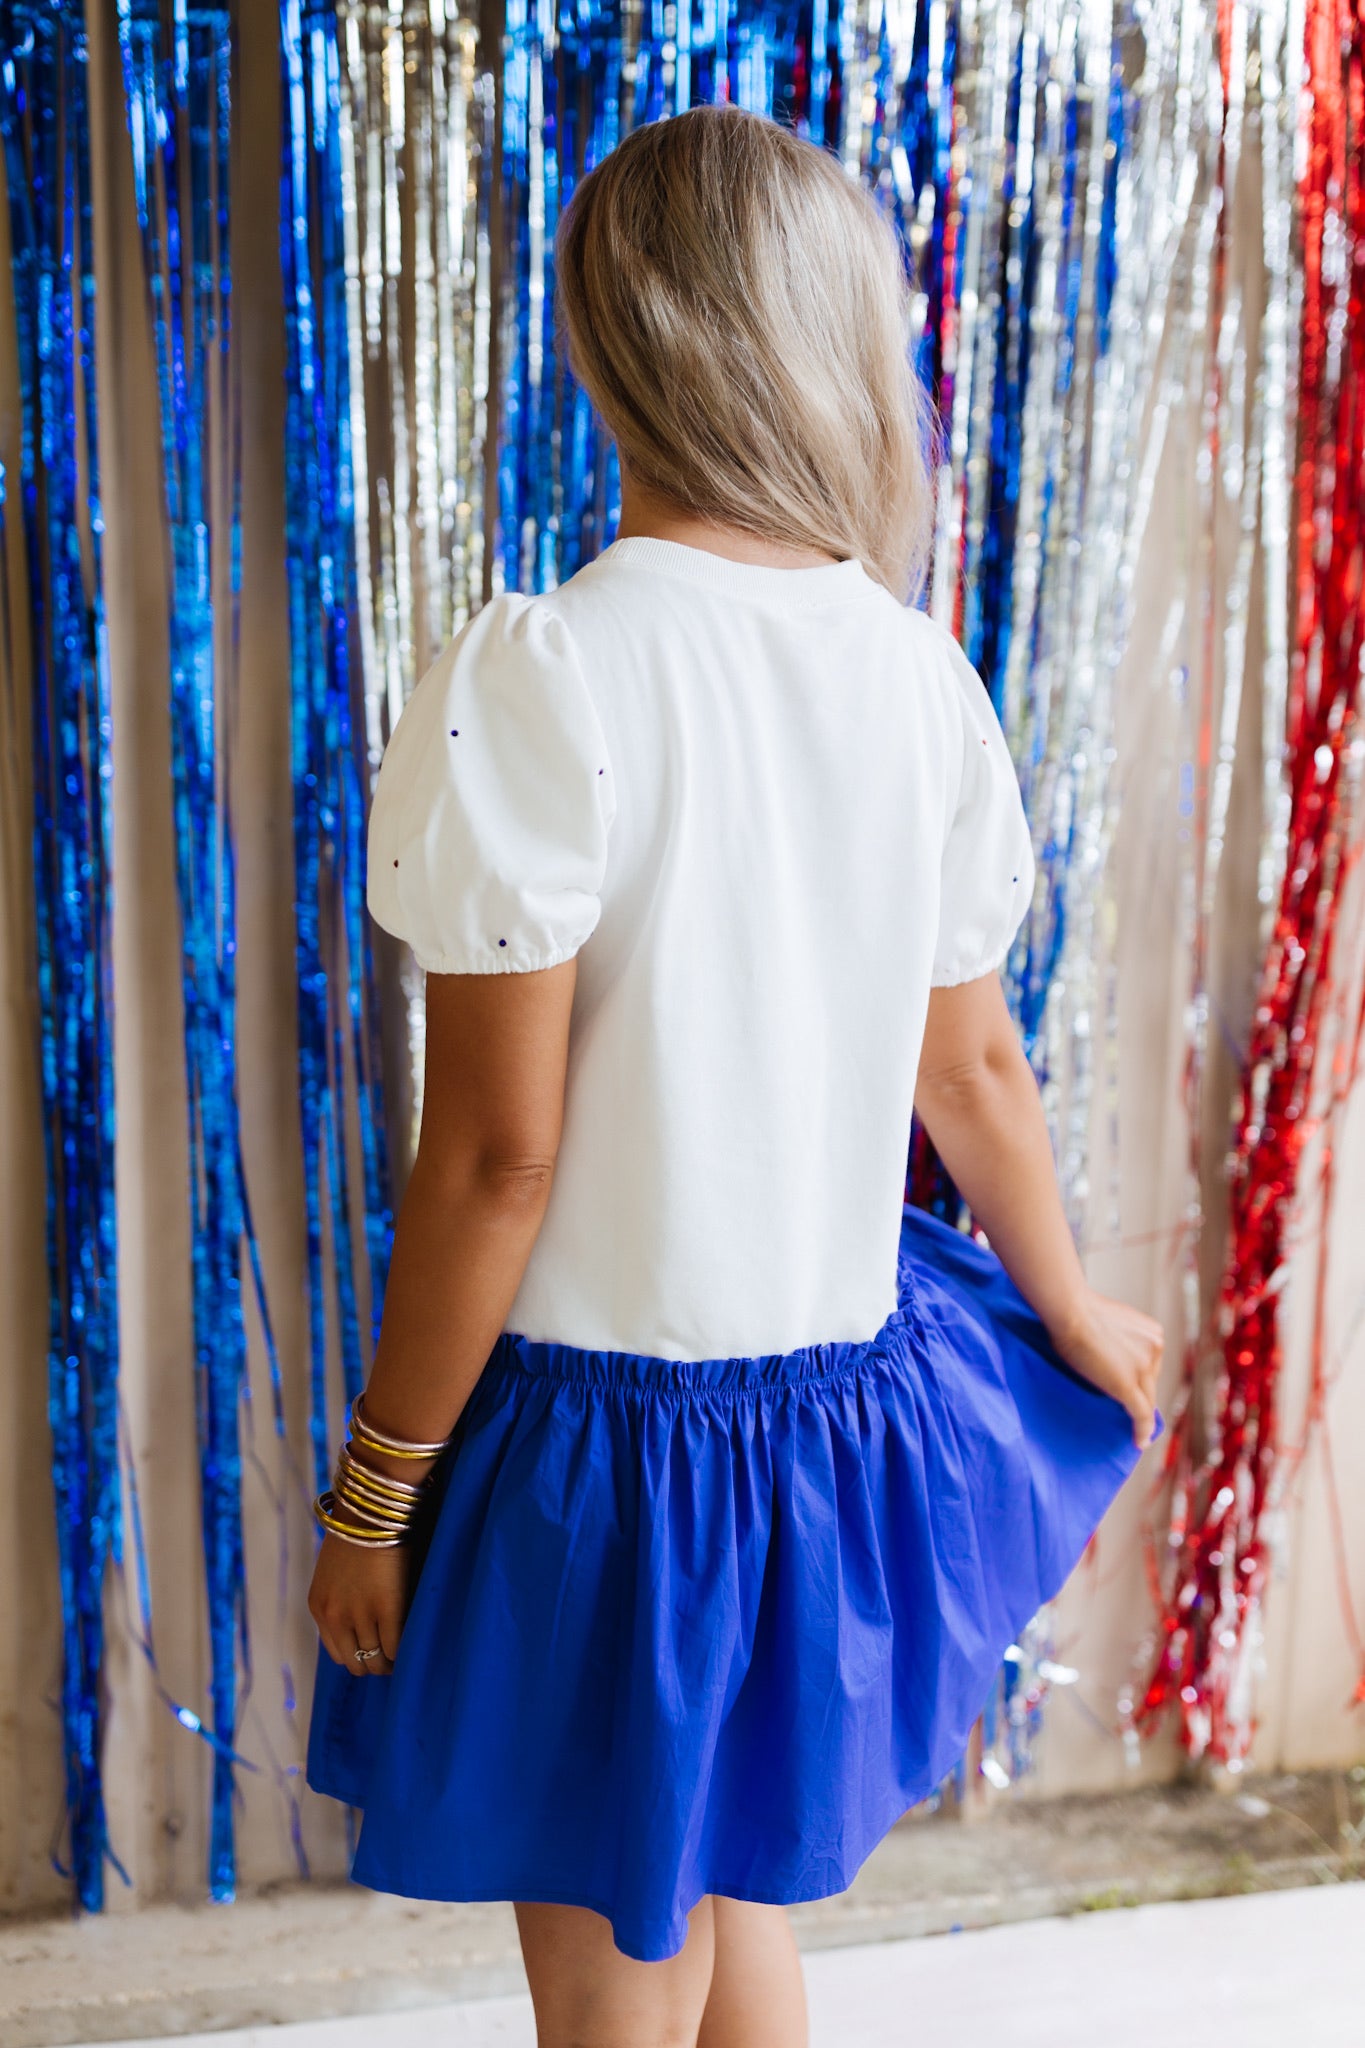 Red White and Blue 'Born To Sparkle' Dress